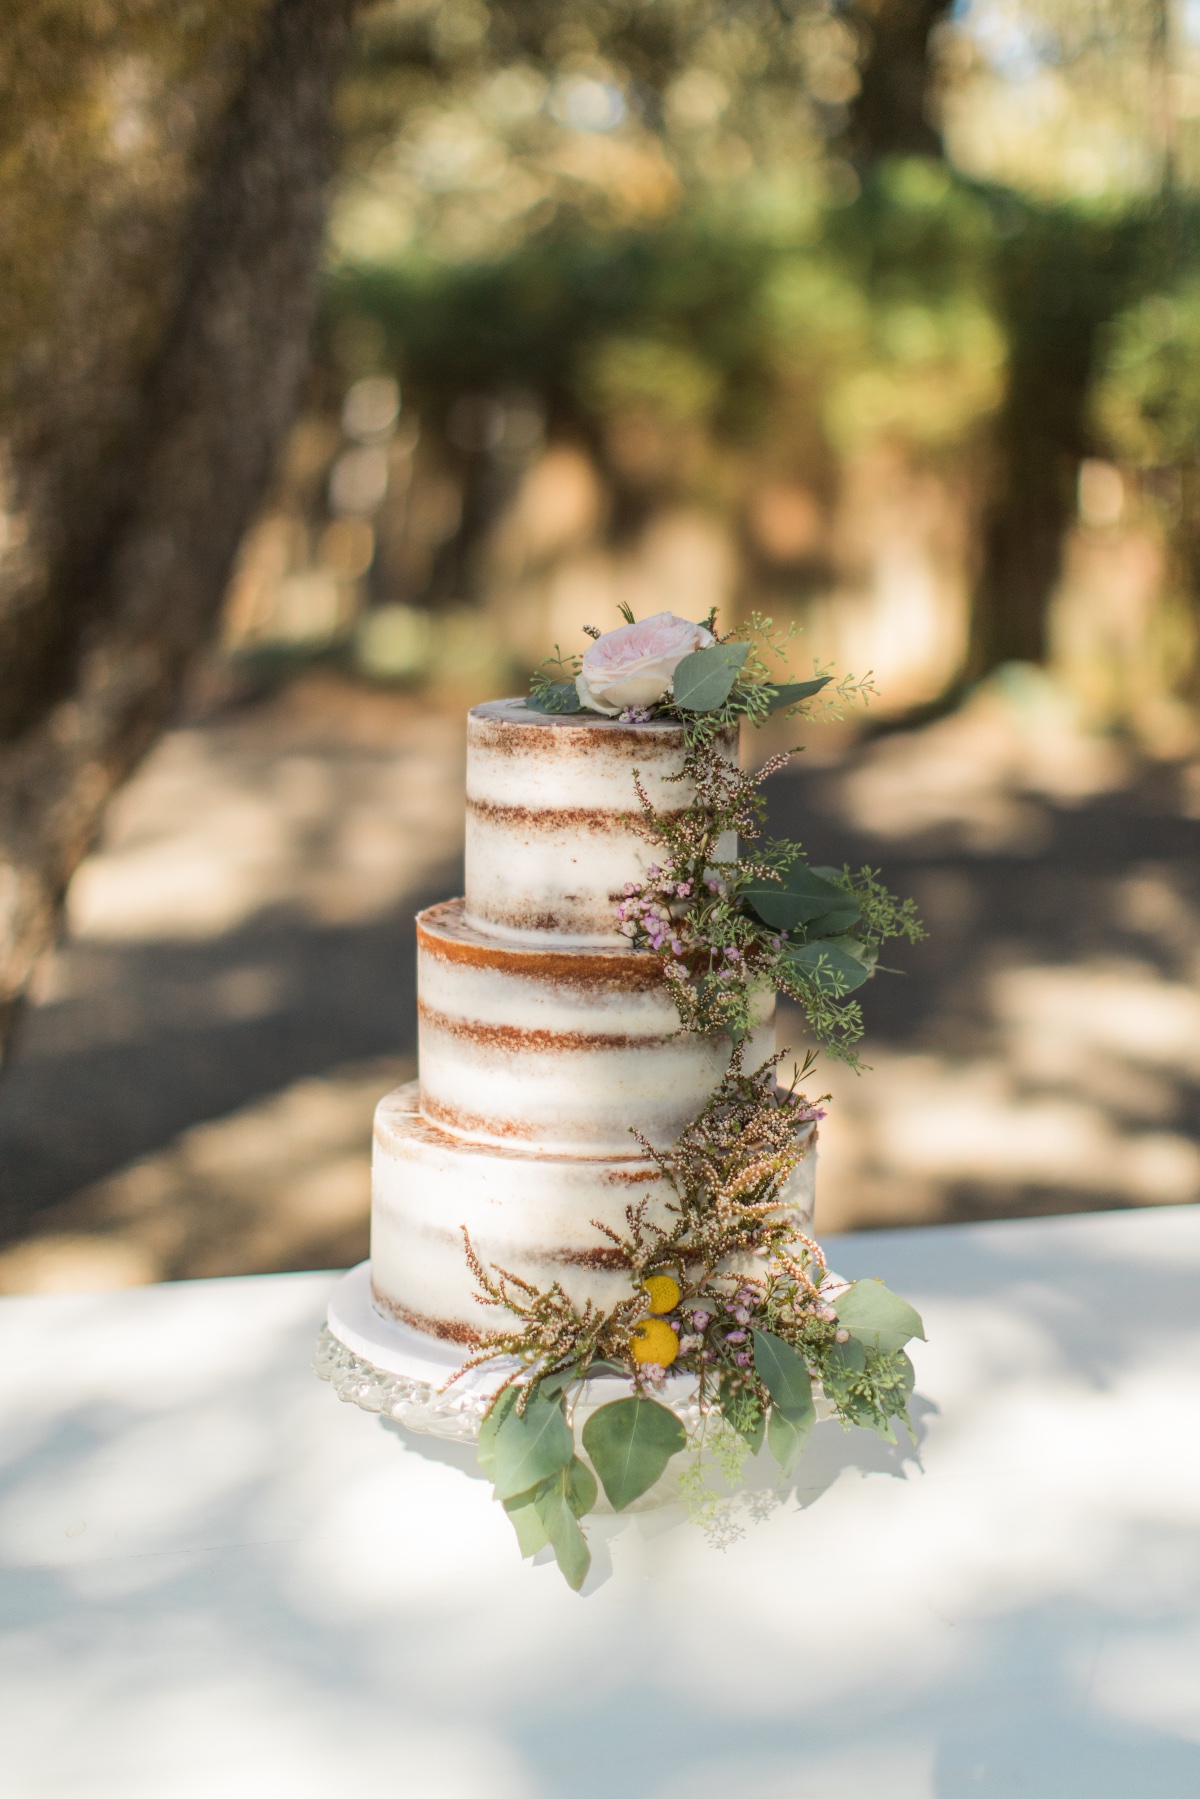 naked wedding cake adorned with greenery and florals